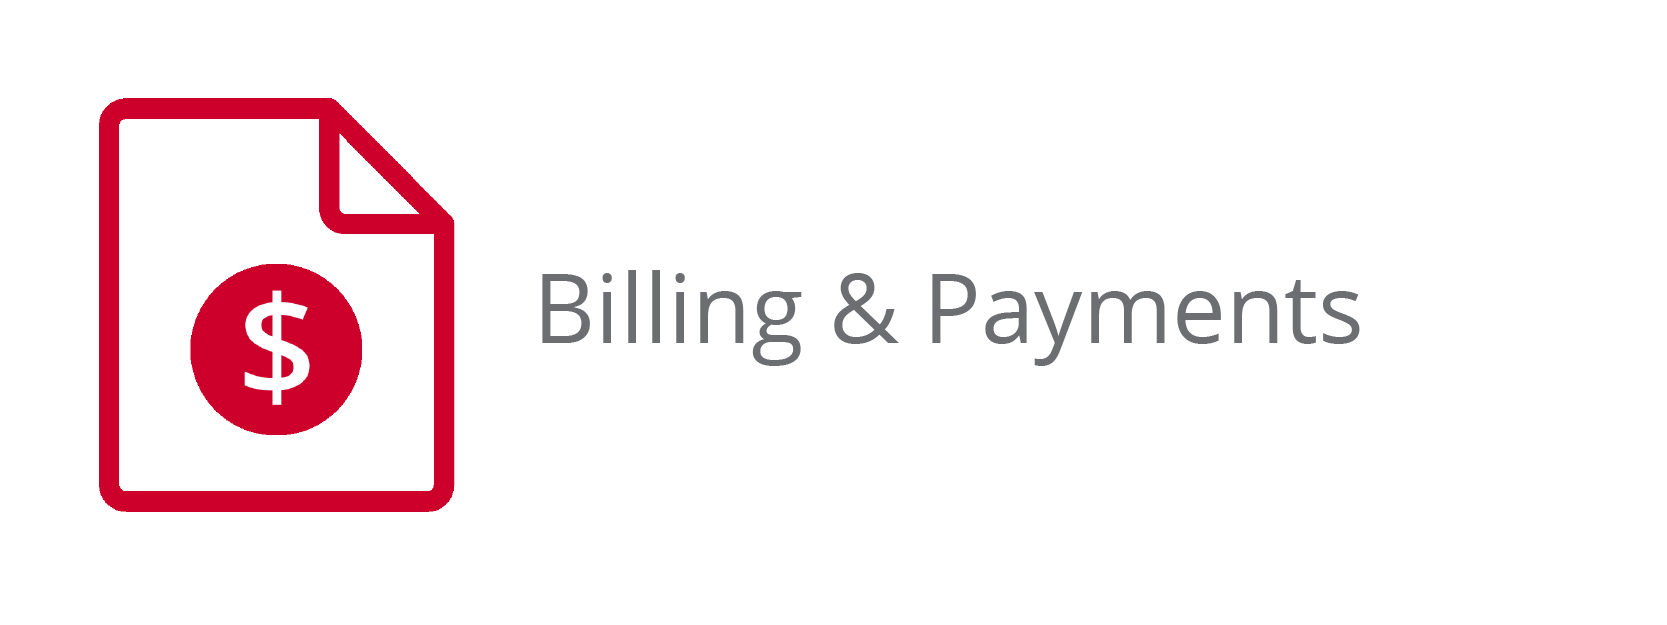 Billing & Payments Button